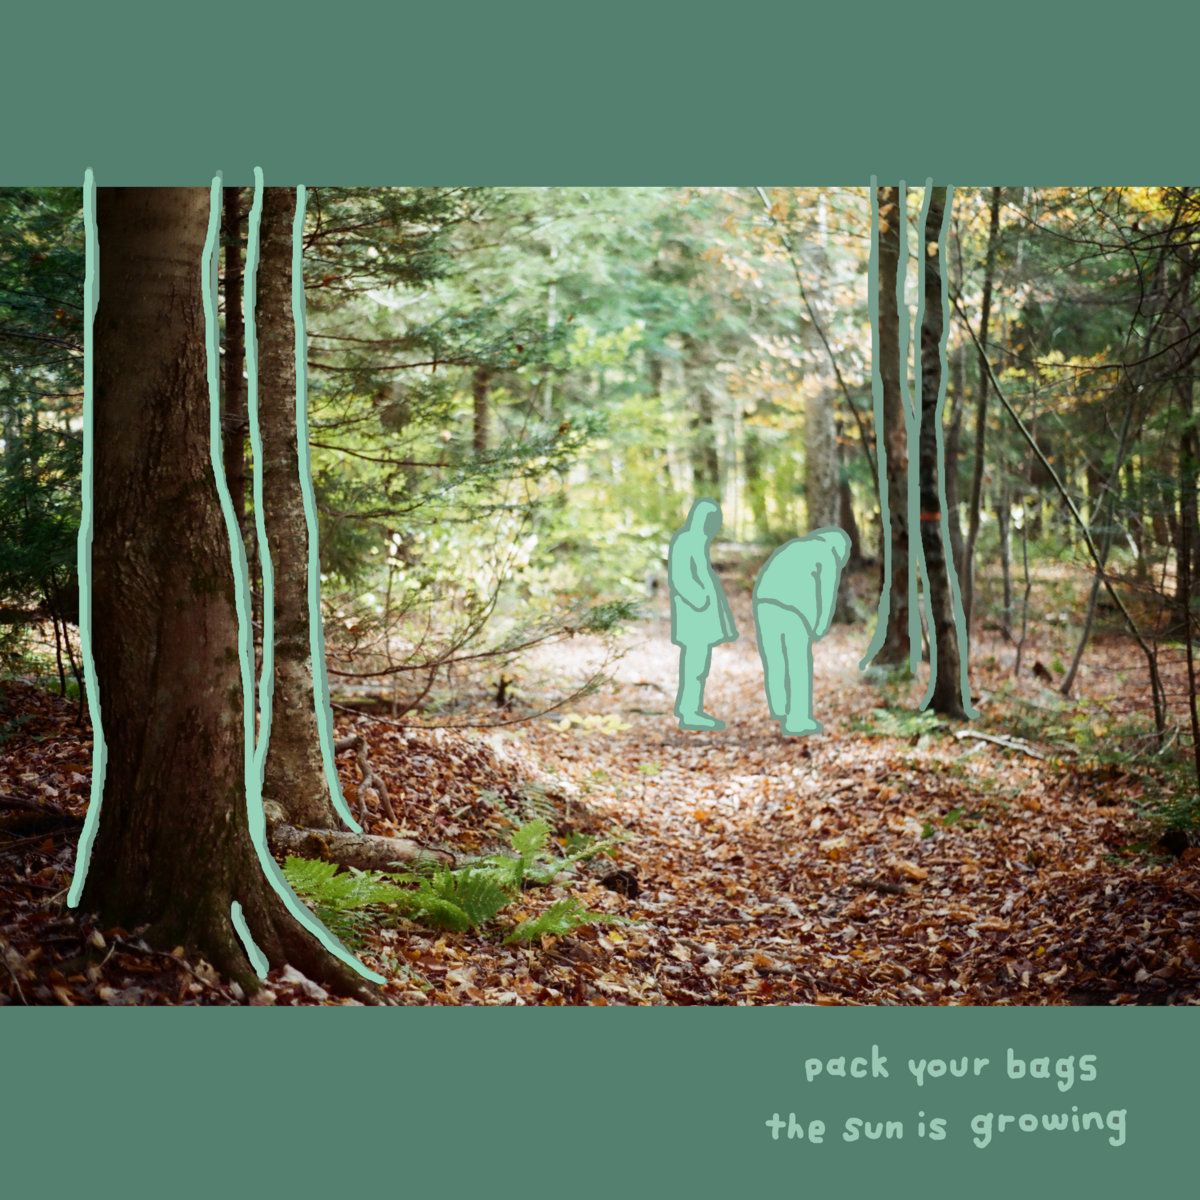 Album: bedbug – pack your bags the sun is growing